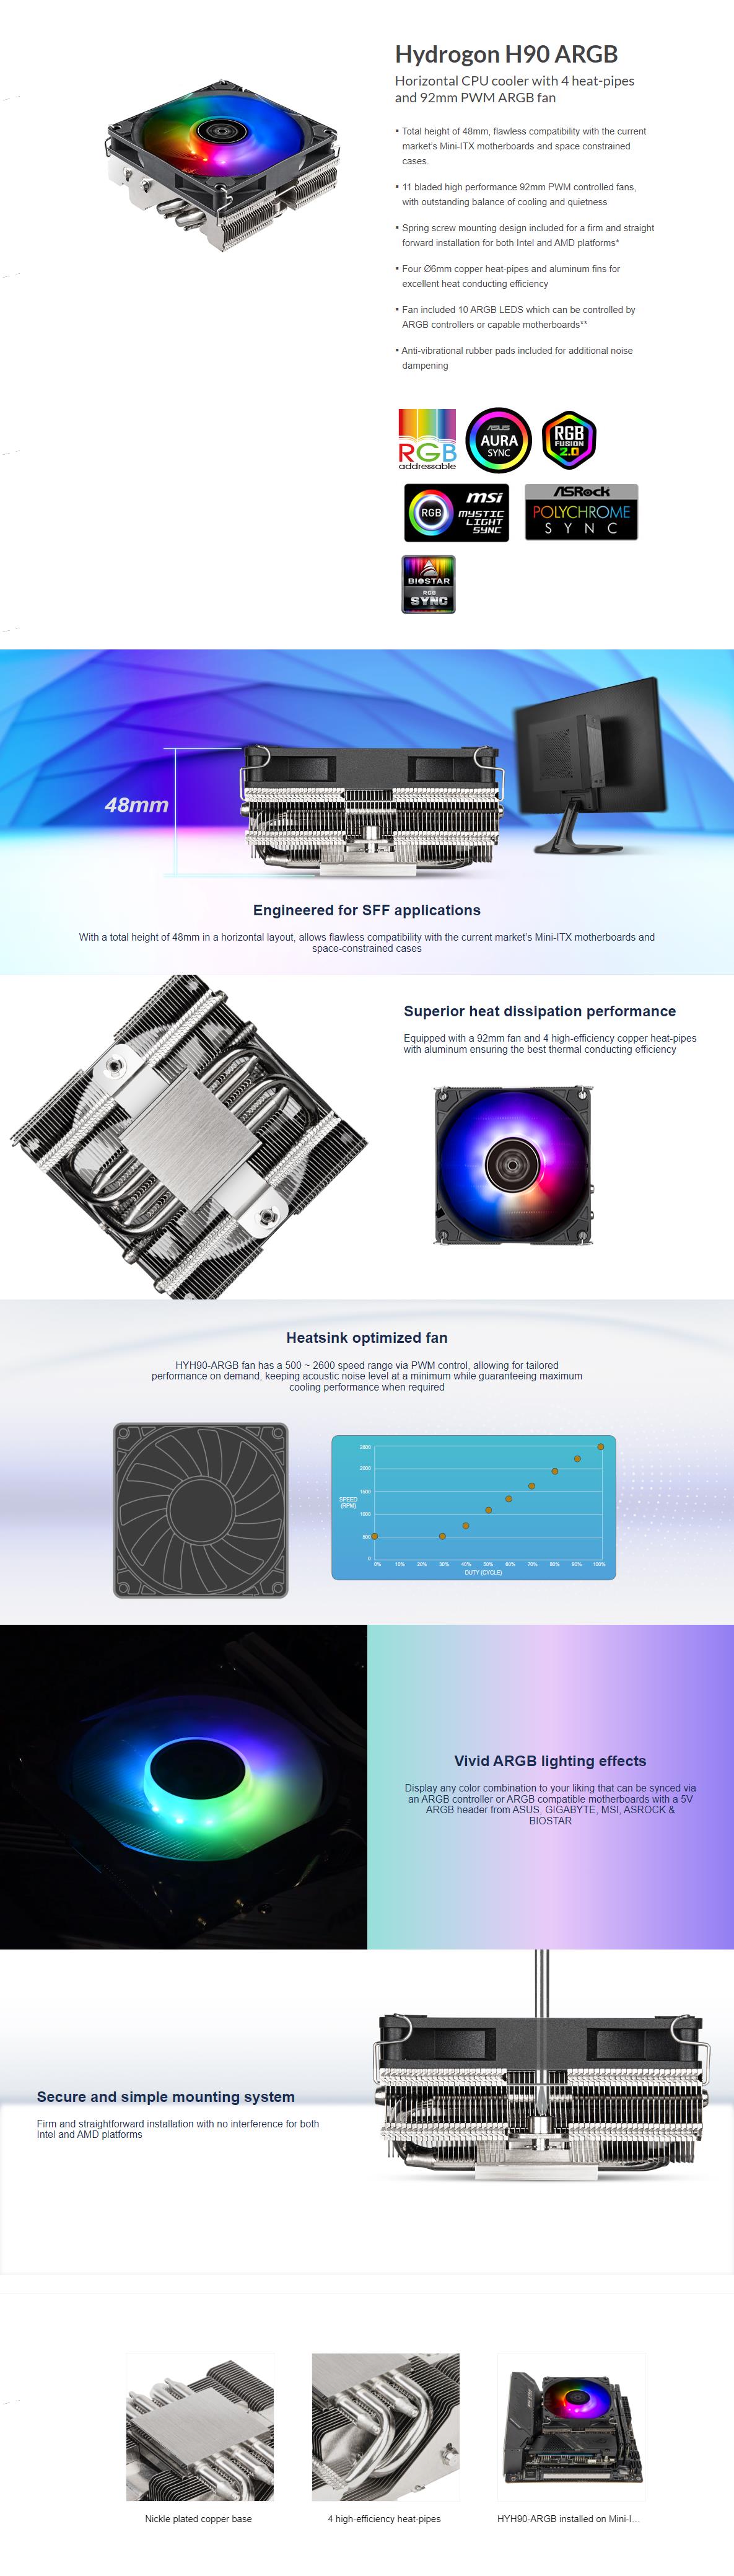 A large marketing image providing additional information about the product SilverStone Hydrogon H90 ARGB CPU Cooler - Additional alt info not provided